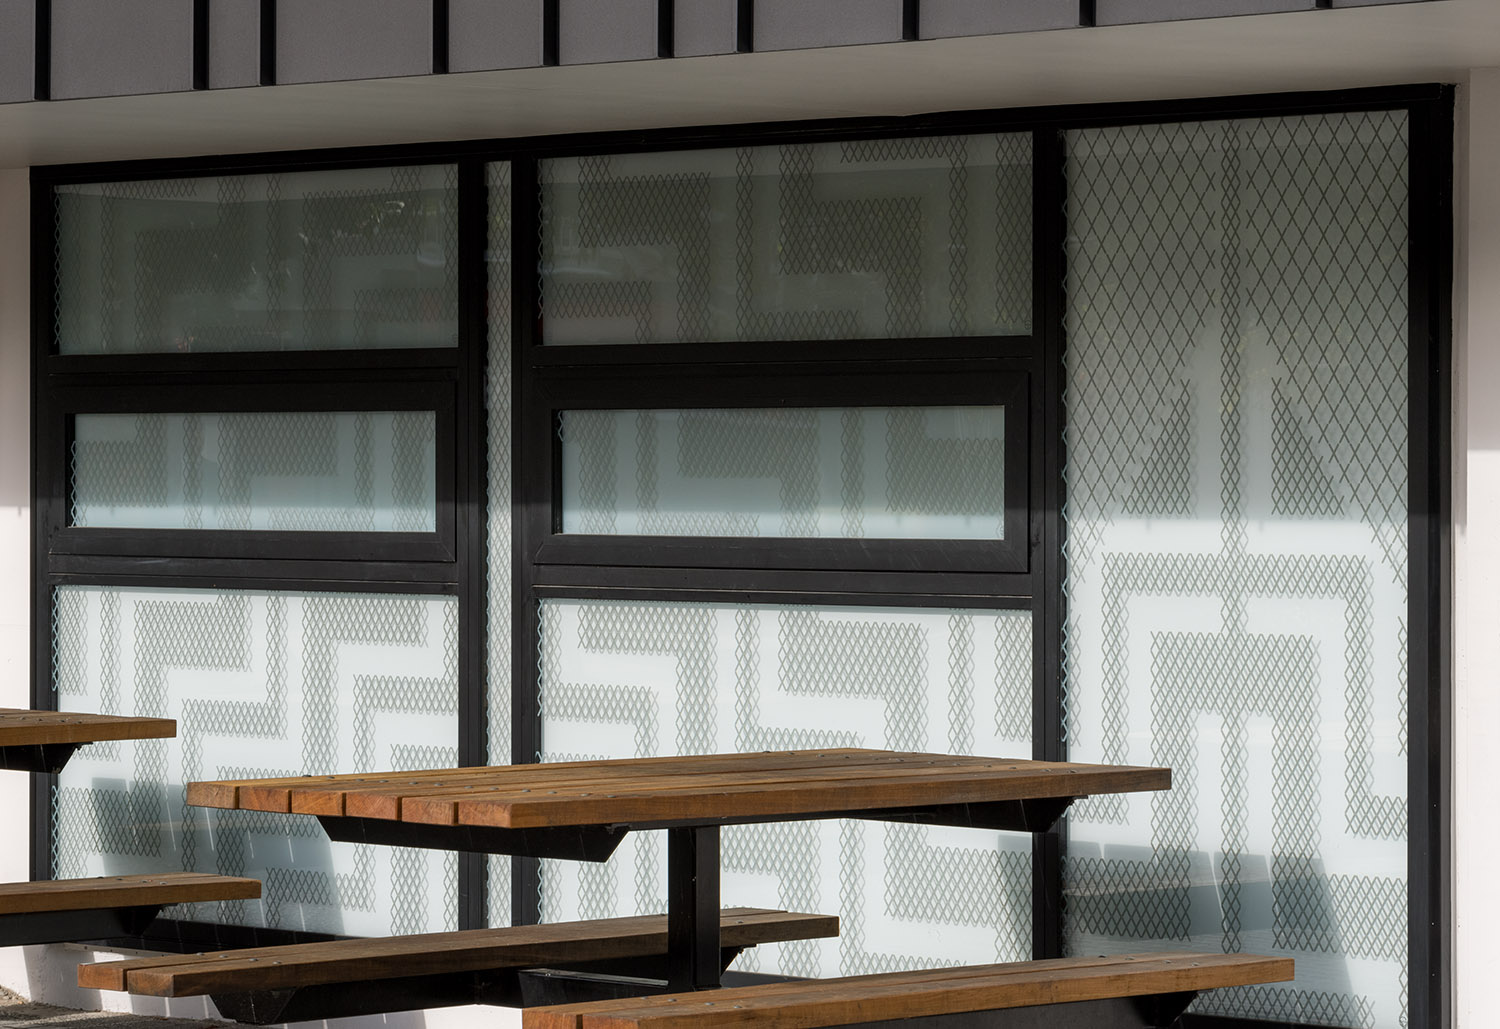 Ornamental latticework pattern in tukutuku style on the windows of St Andrew's College's new cafeteria, featuring the St Andrew's cross and traditional Māori elements.